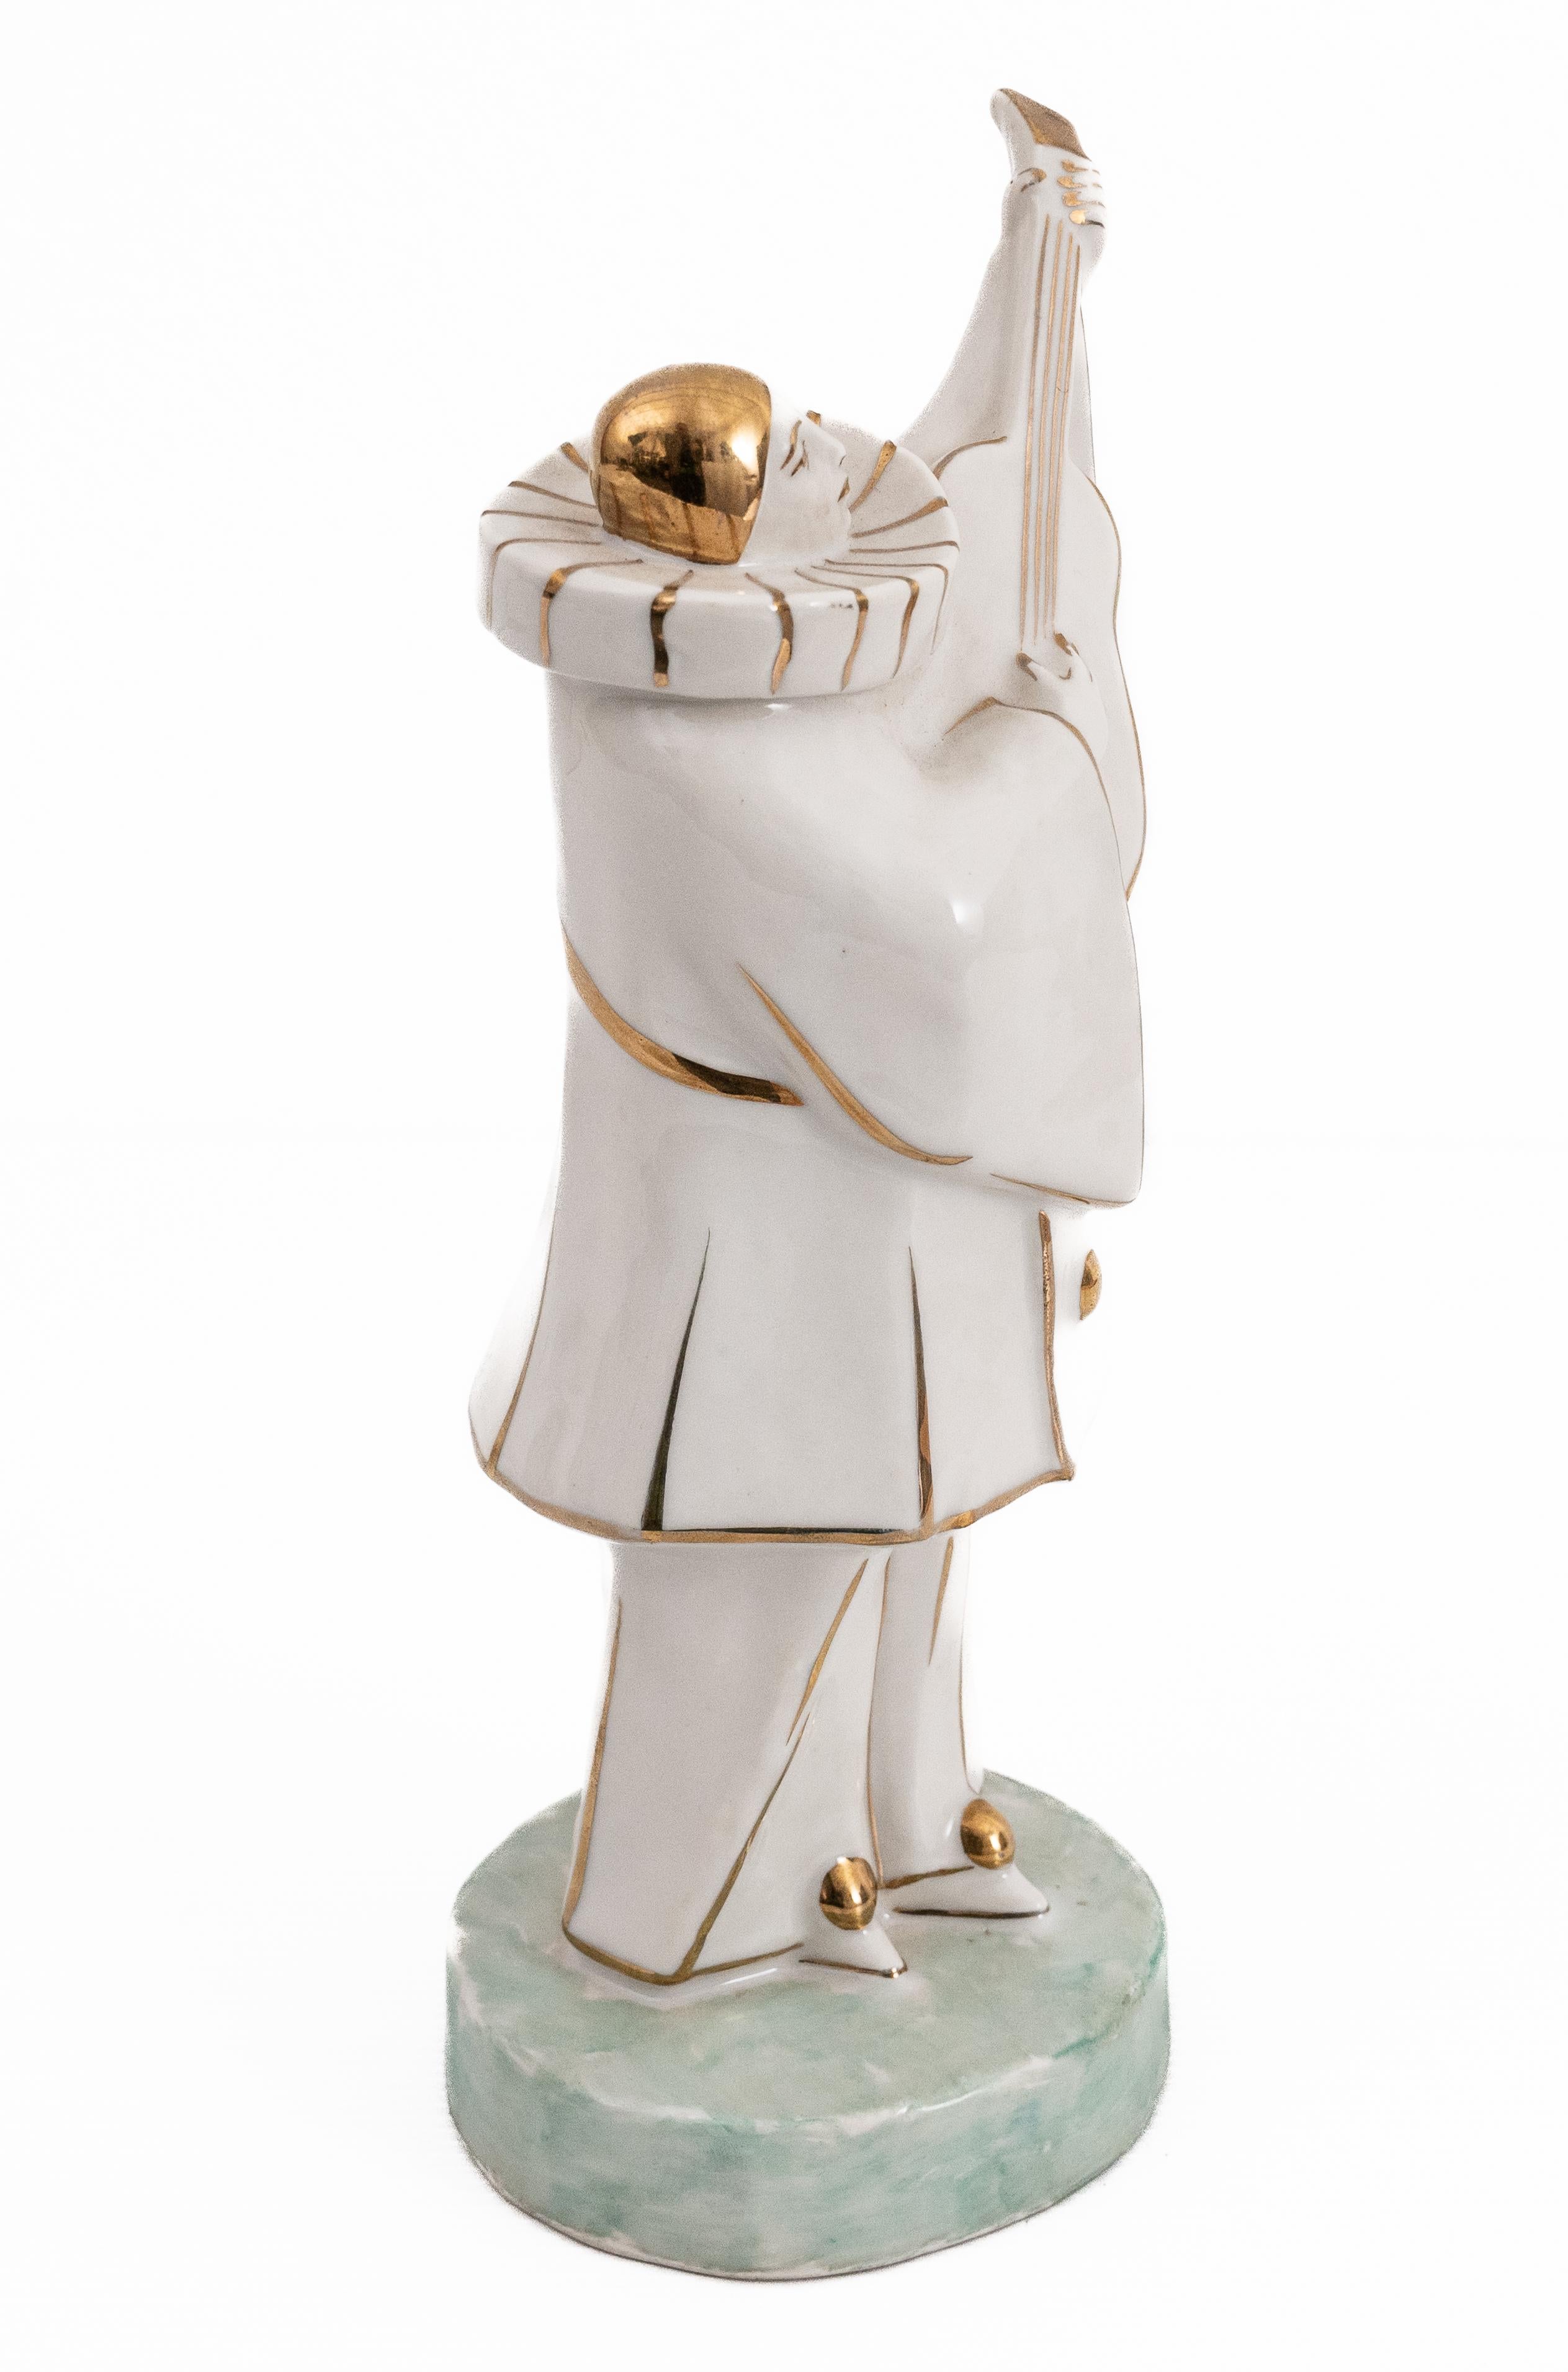 20th Century Limoges Porcelain Pierrot Musician in White and Gold by Edouard Marcel Sandoz For Sale